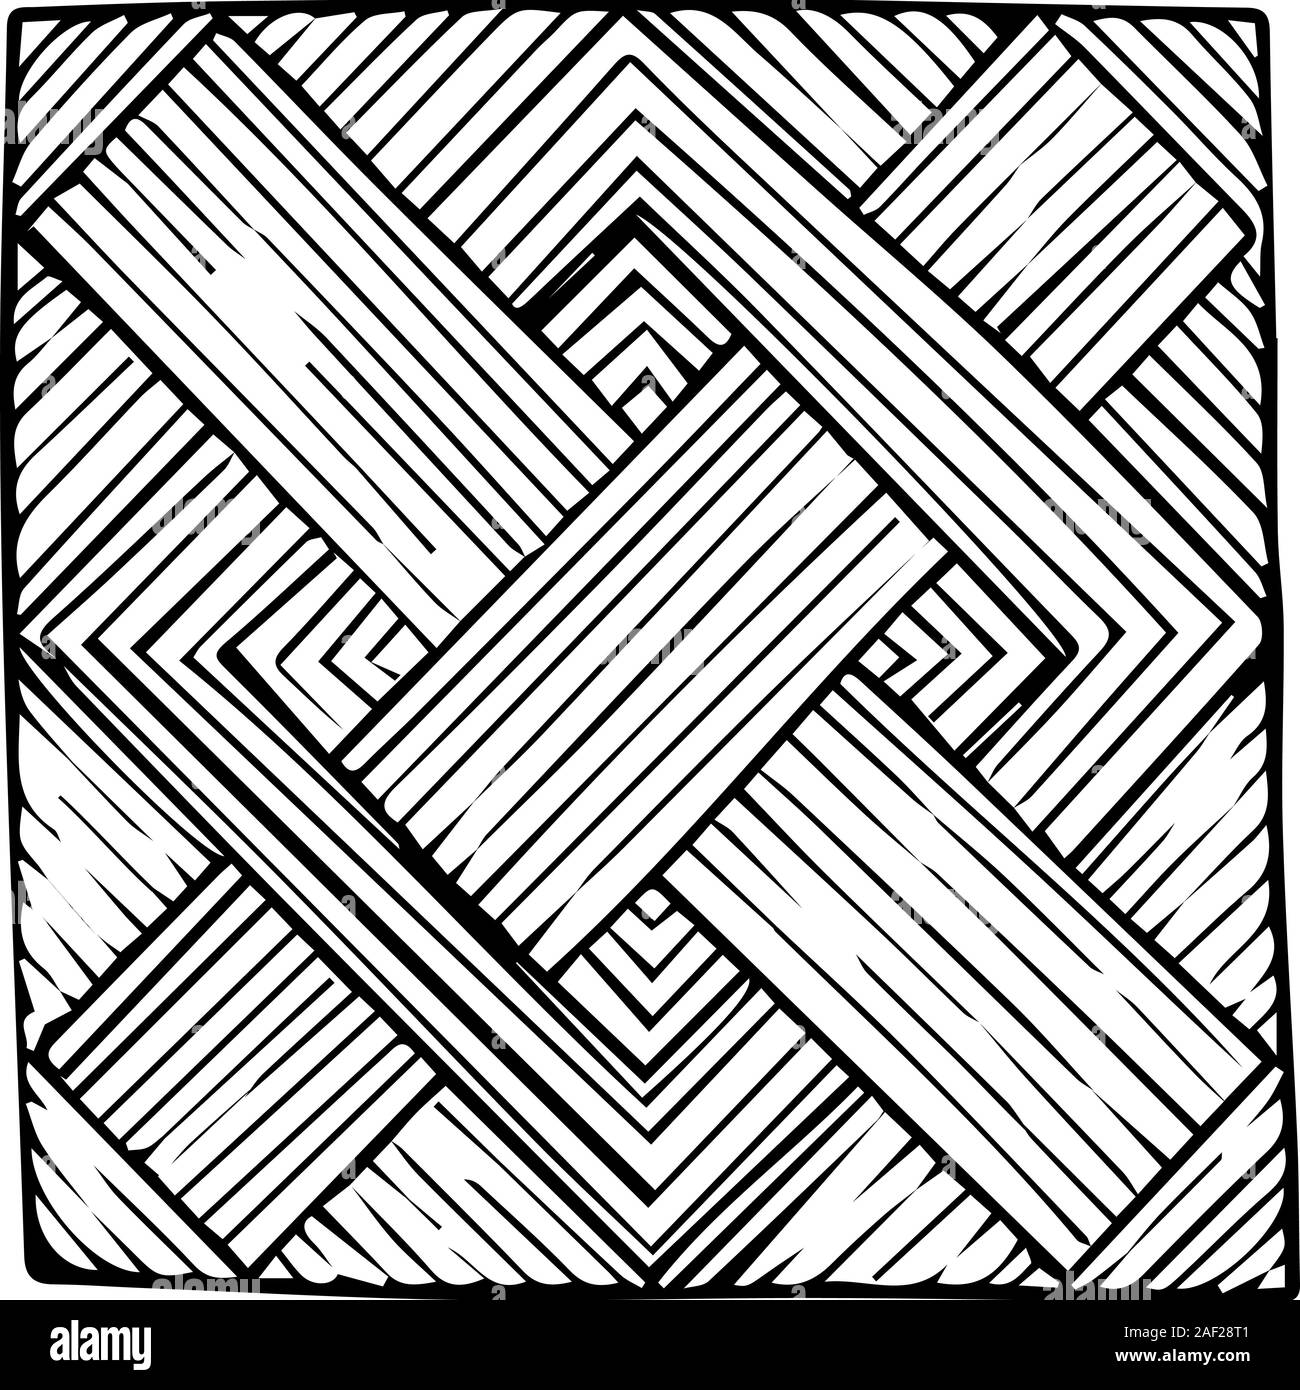 Black and white graphics. Geometric square symmetric figures. Straight lines. Vector illustration with the effect of hand-made graphics. Stock Vector